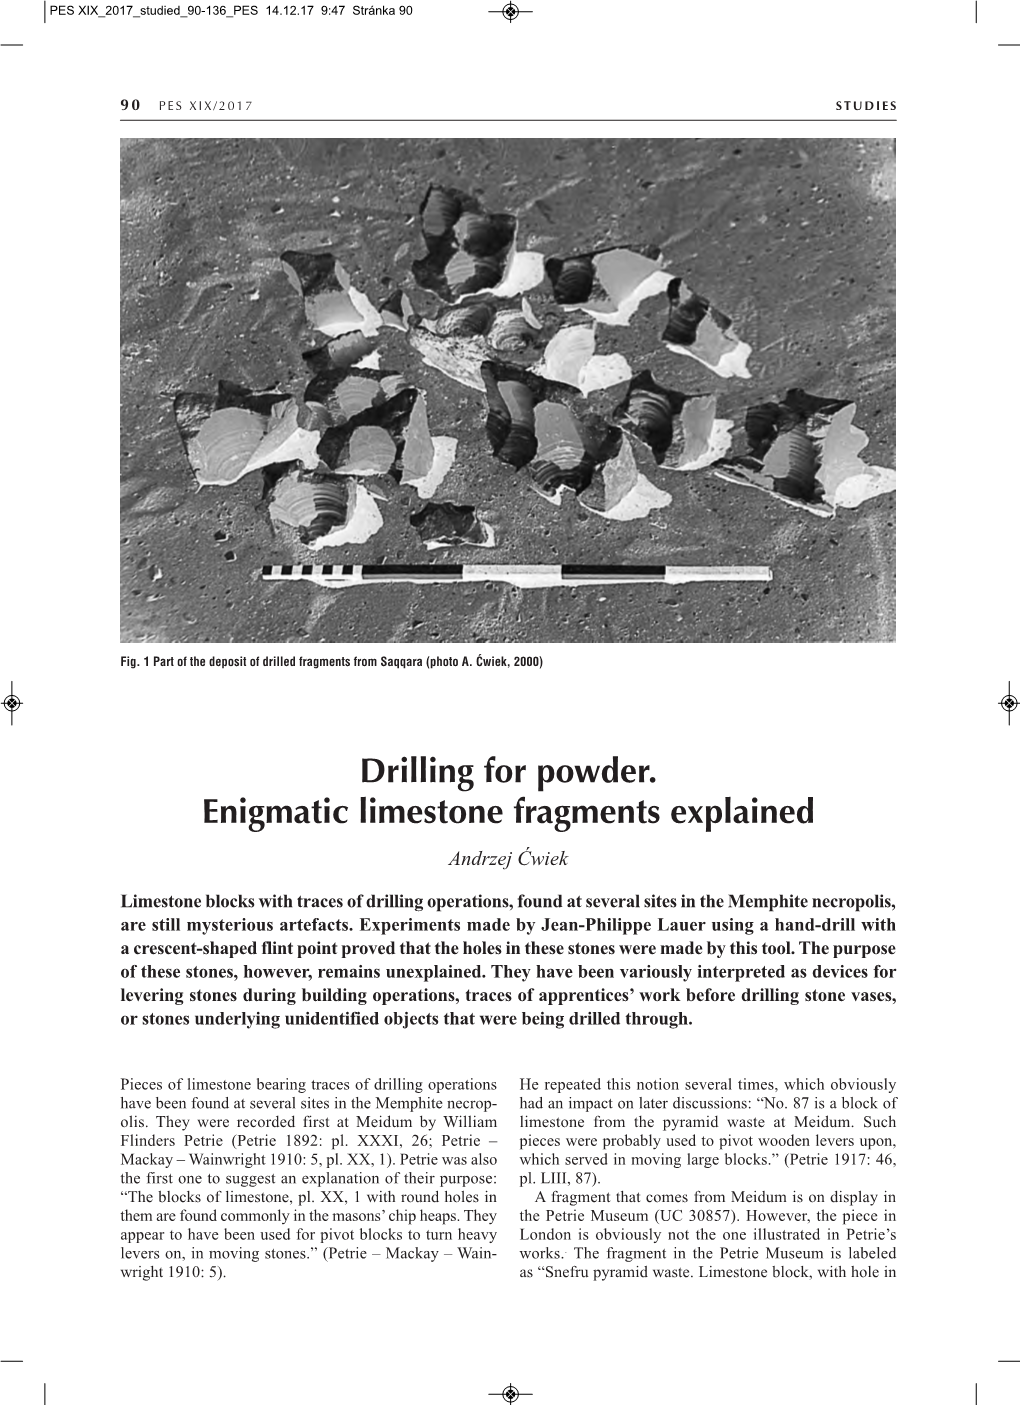 Drilling for Powder. Enigmatic Limestone Fragments Explained